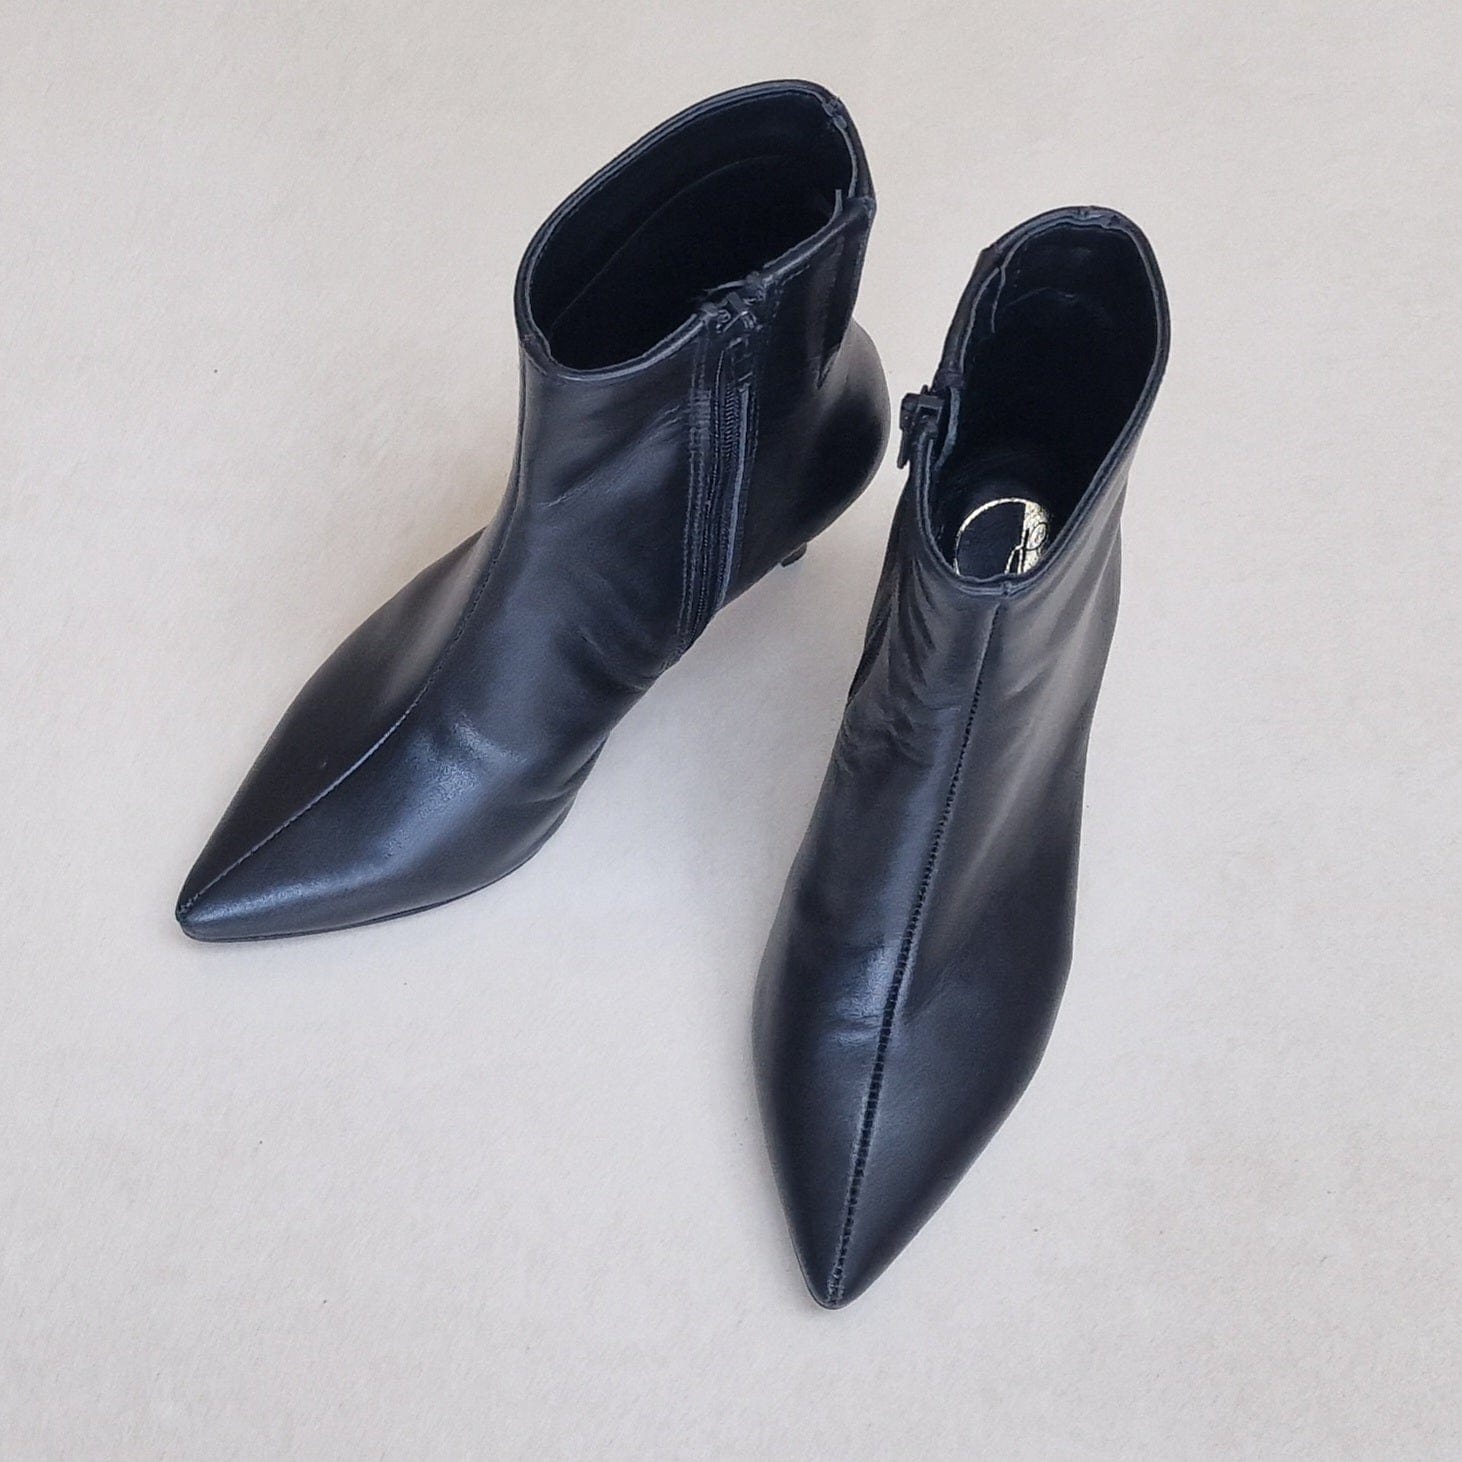 Pointed toe black leather kitten heel ankle boots